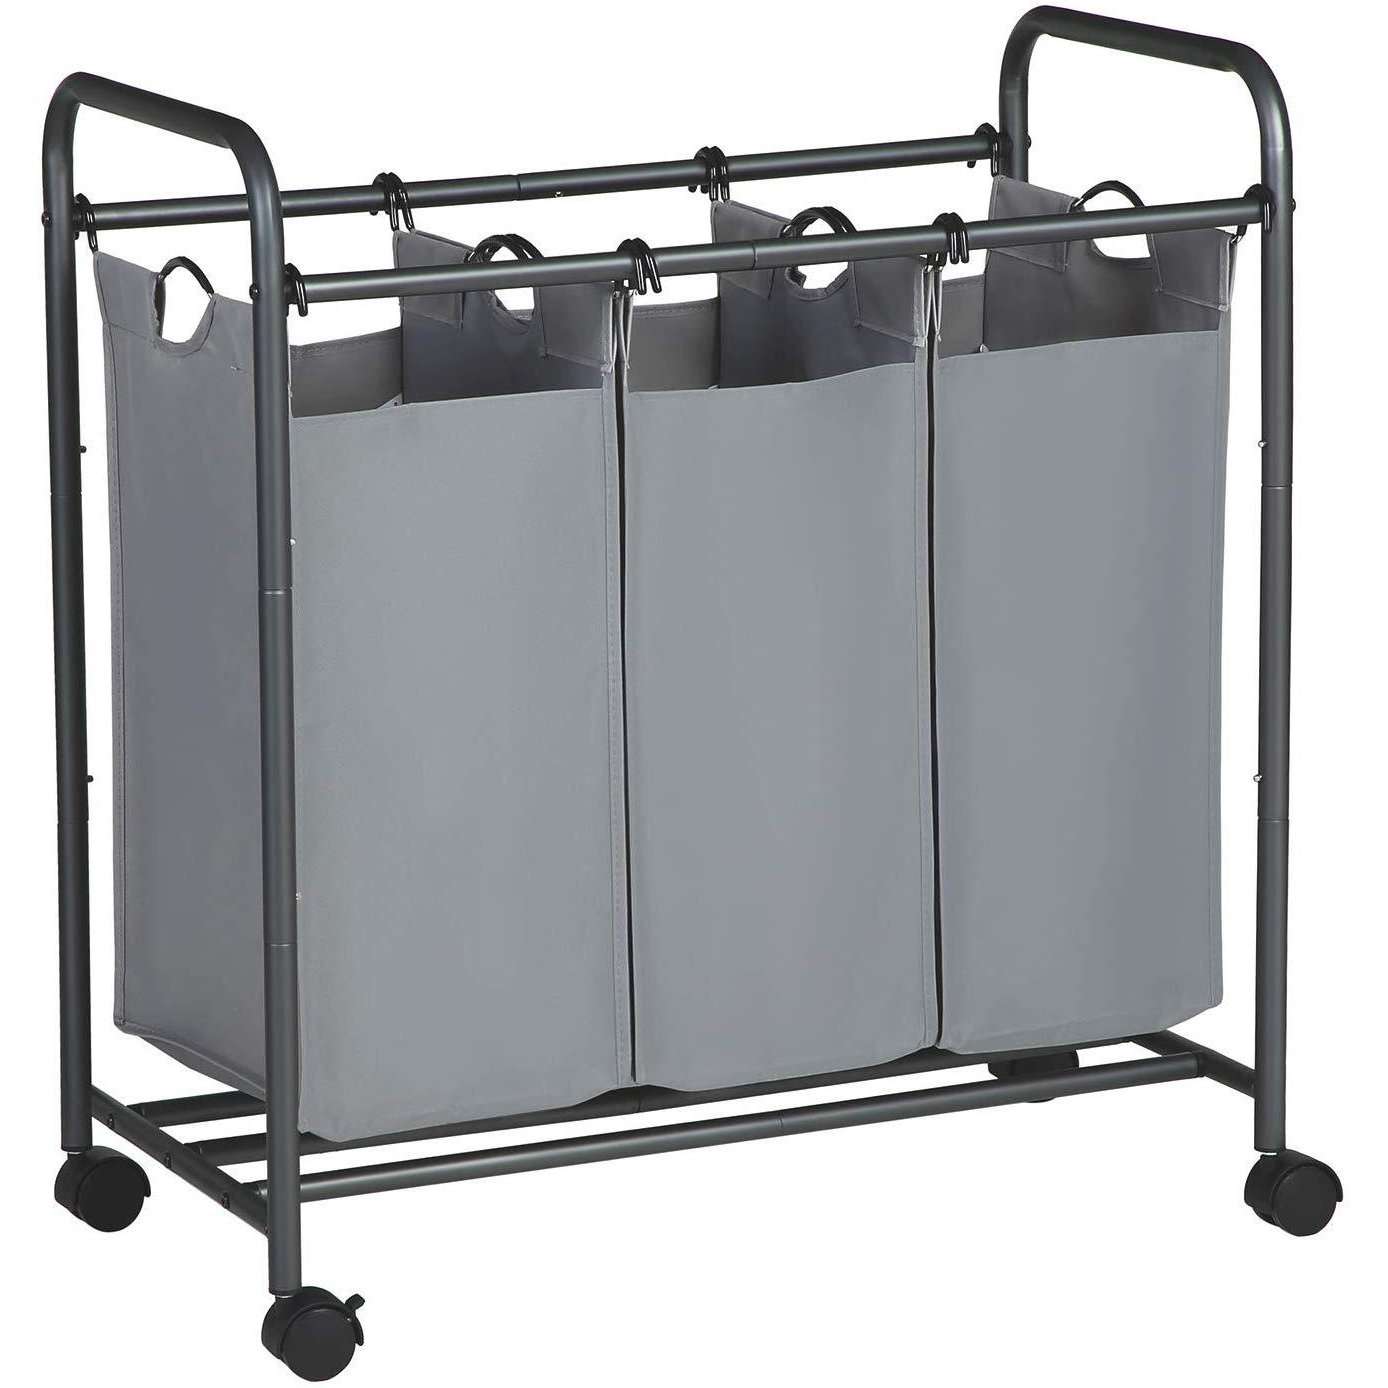 Nancy's Laundry Sorter 142L - Laundry Basket With 3 Compartments Gray